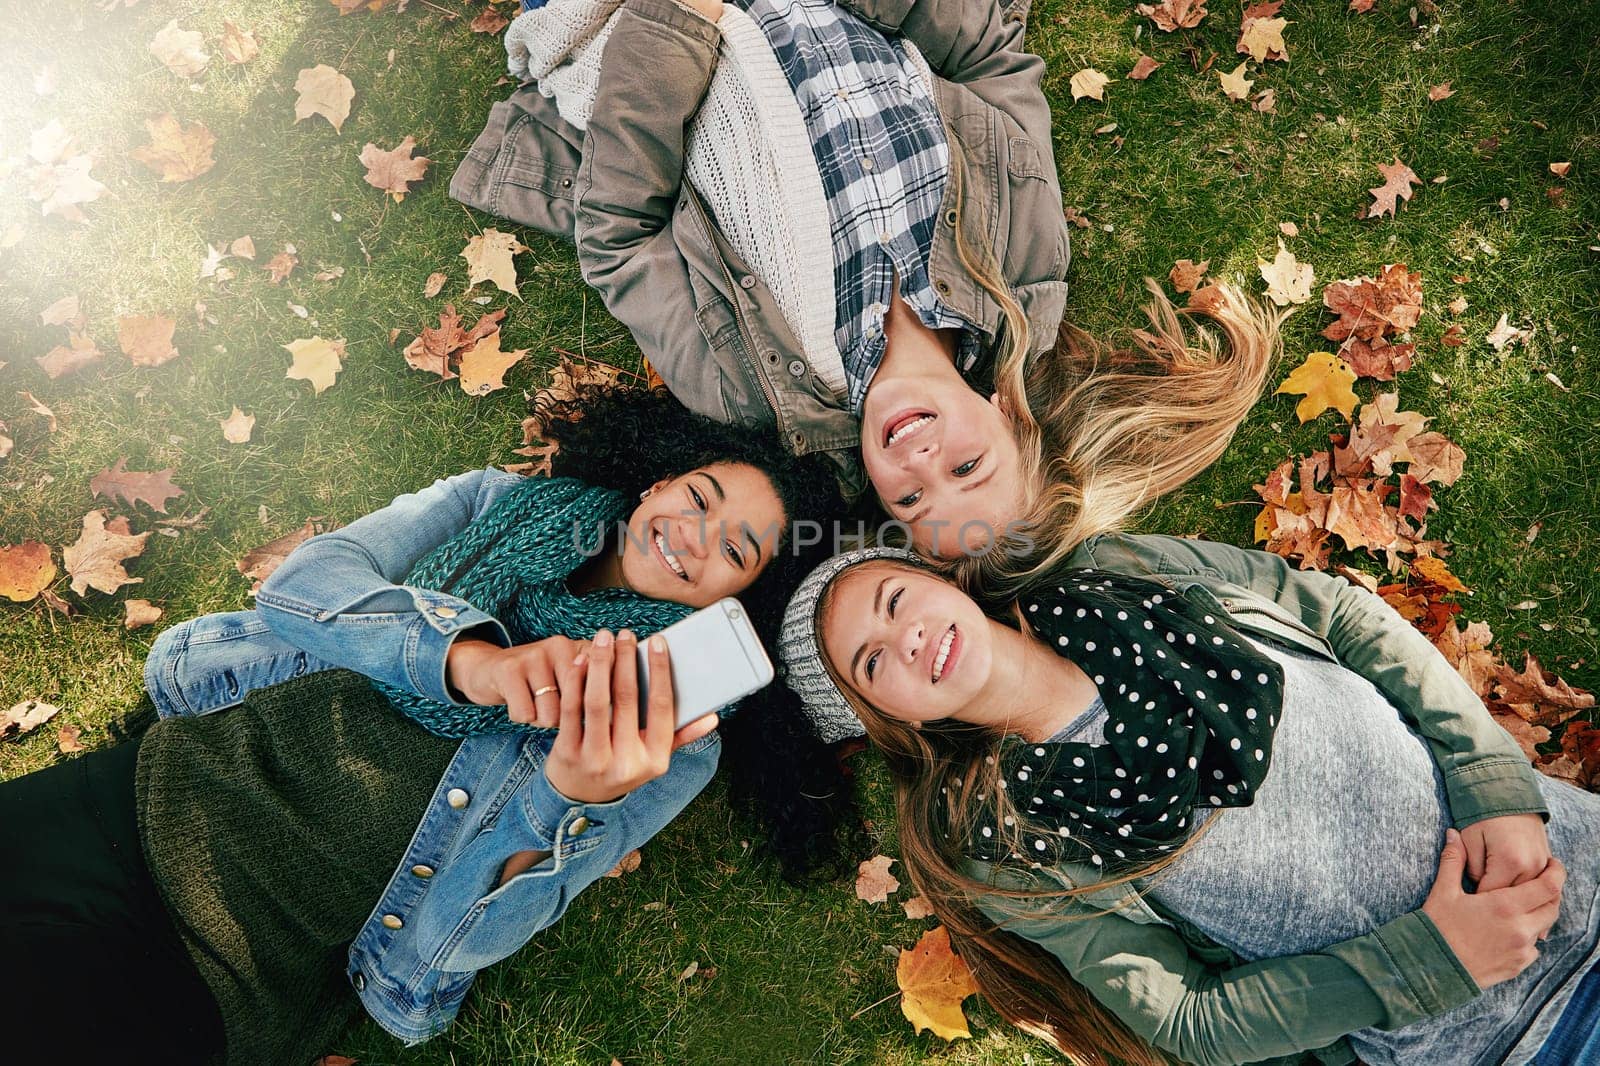 Check out this cool video I found. High angle shot of three happy teenagers relaxing together on the grass outside